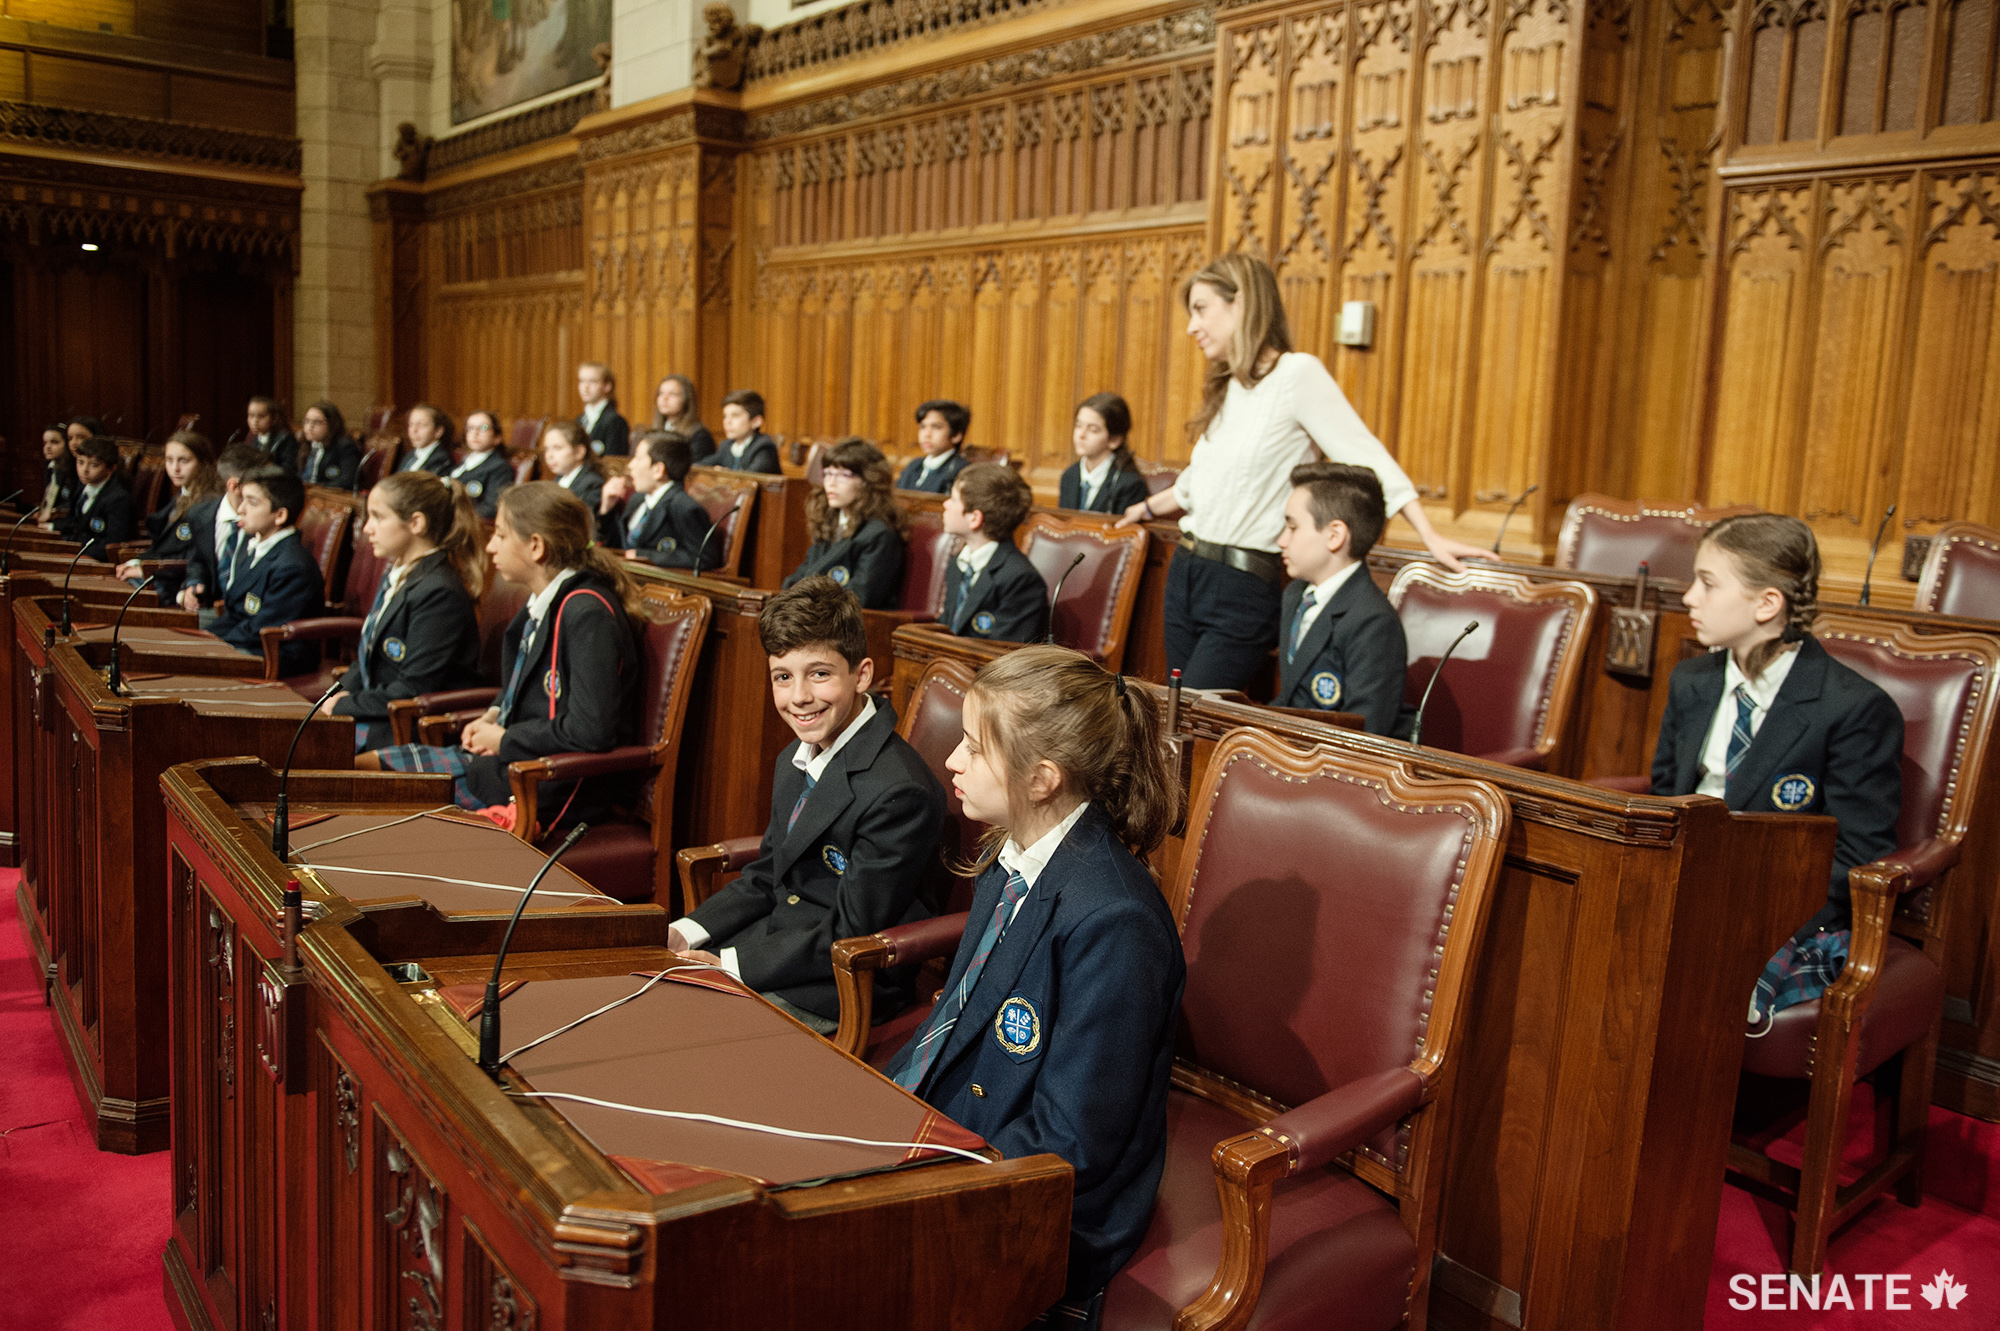 Students from Montreal’s Socrates-Demosthenes school visited the Senate on May 17, 2017 as part of a new initiative that brings elementary and middle school students to Parliament to spend time with Canadian senators.